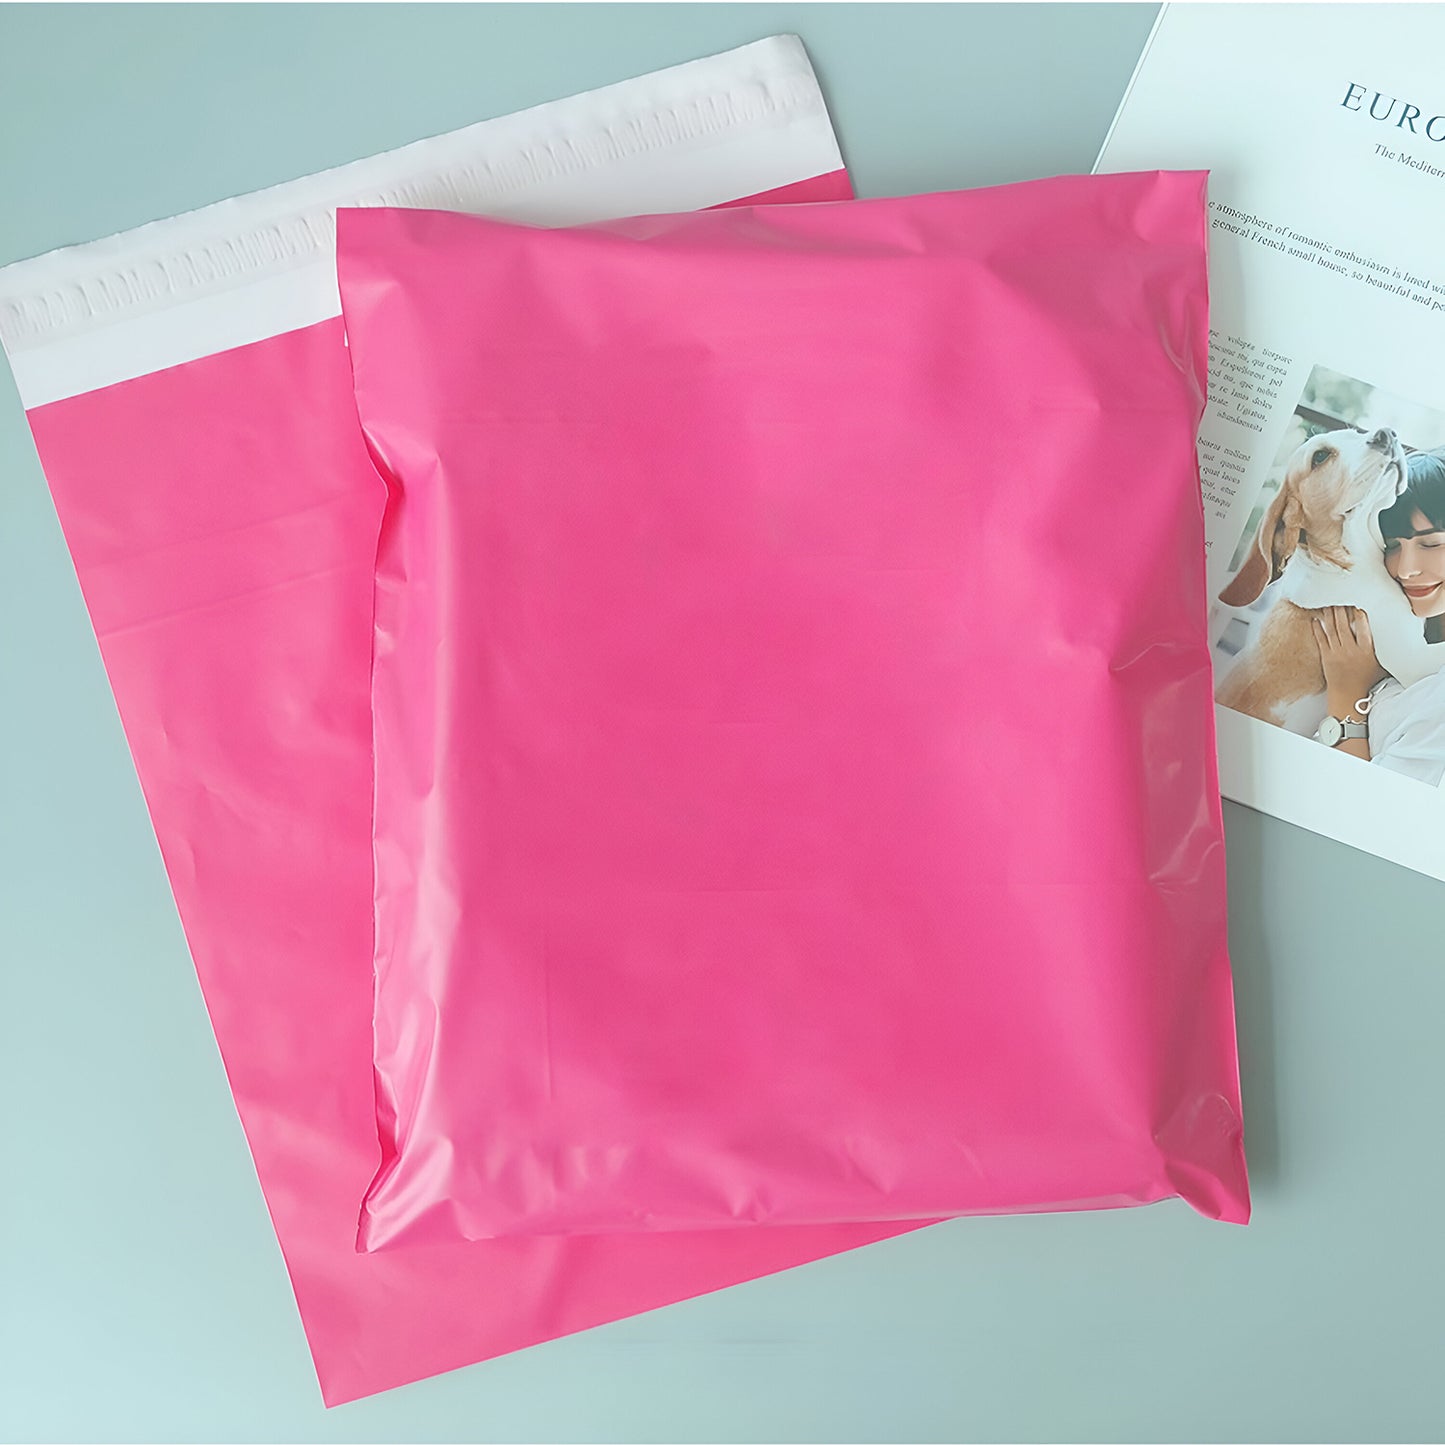 Bags Mailers Mailing envelopes Bags